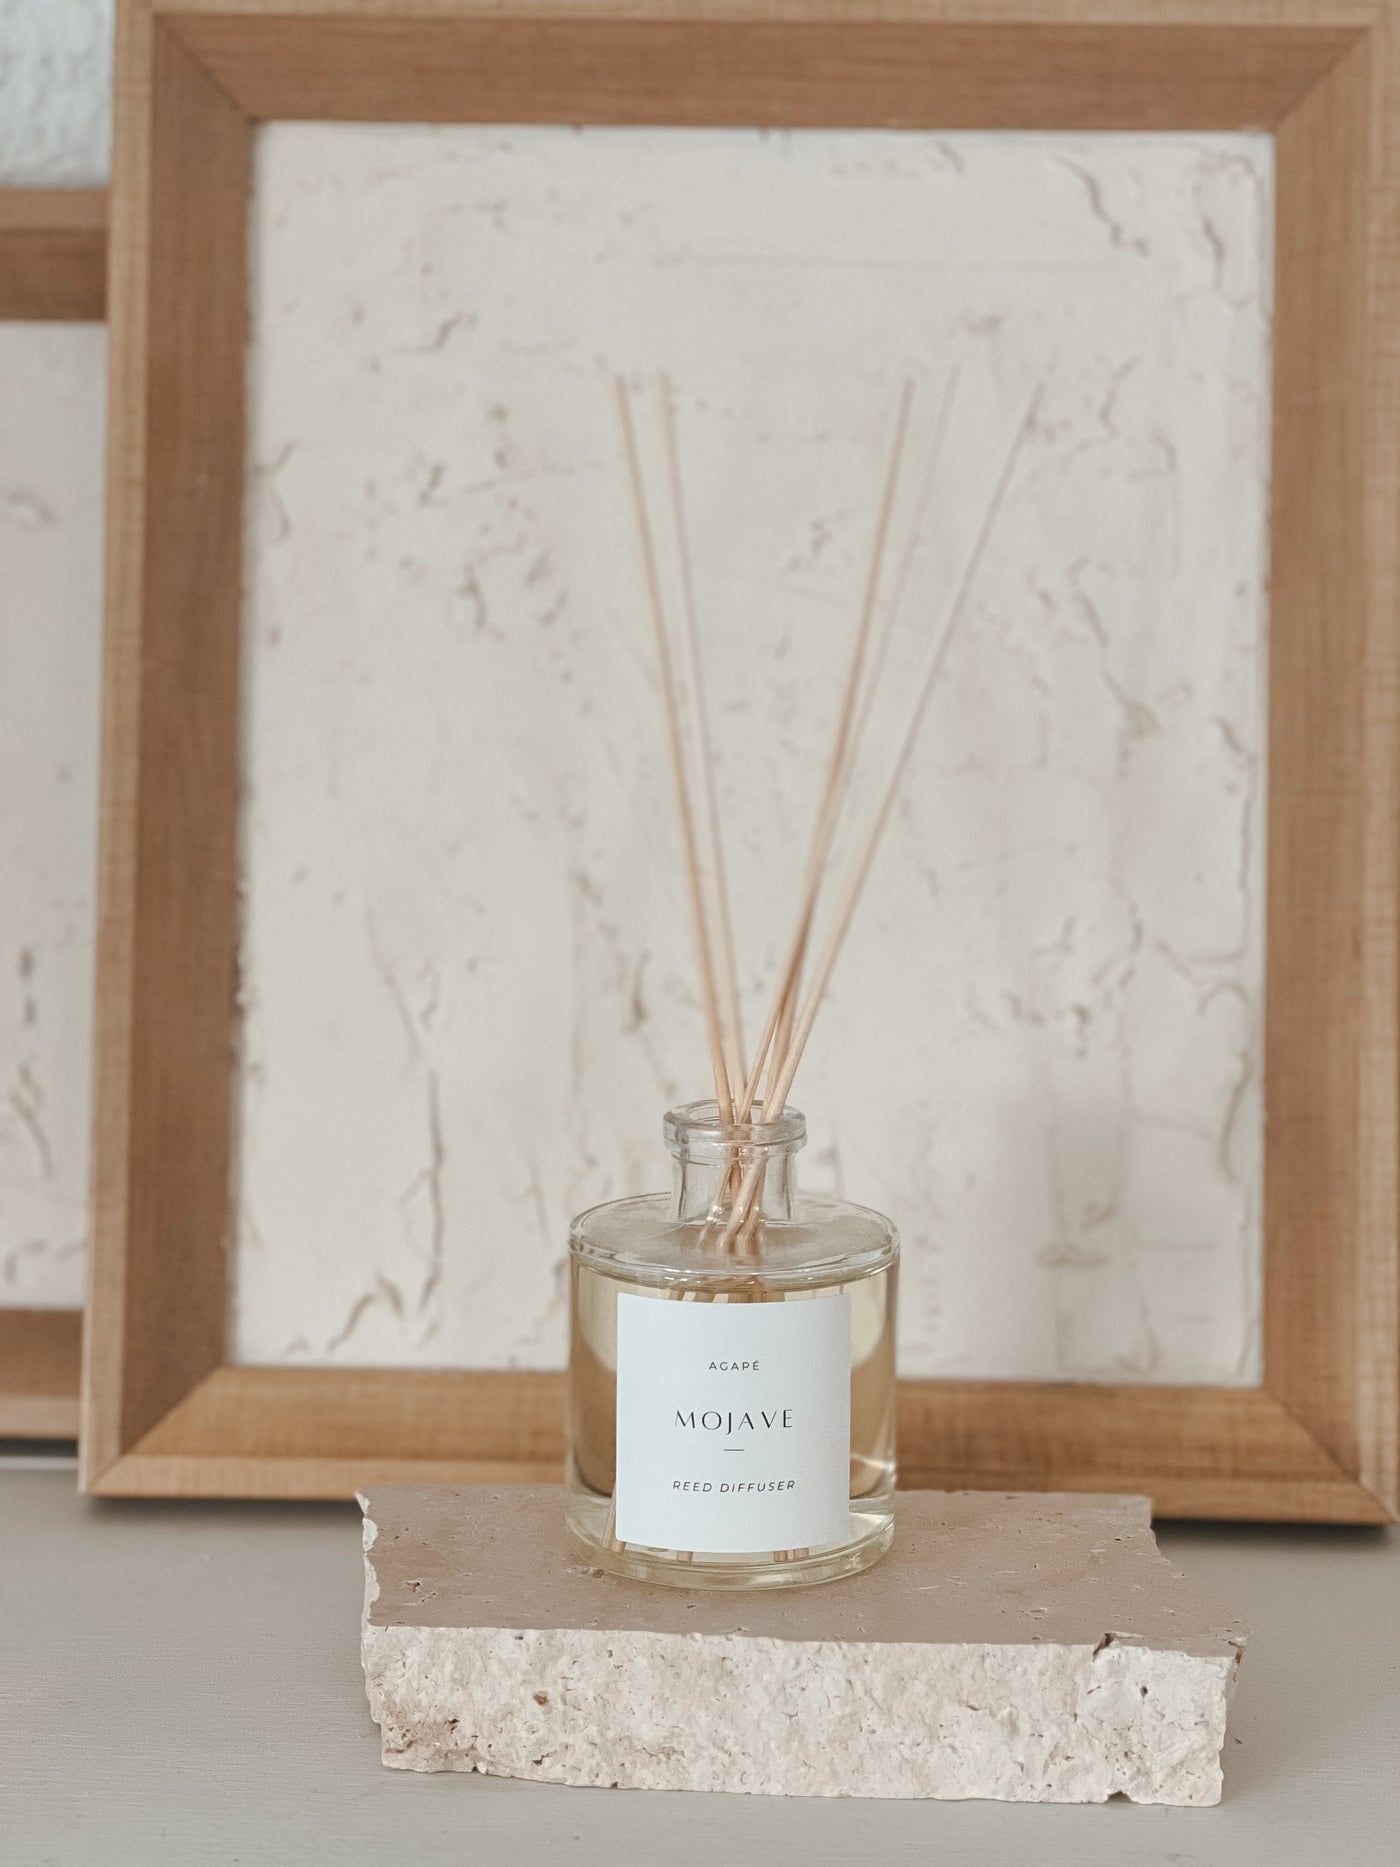 MOJAVE REED DIFFUSER